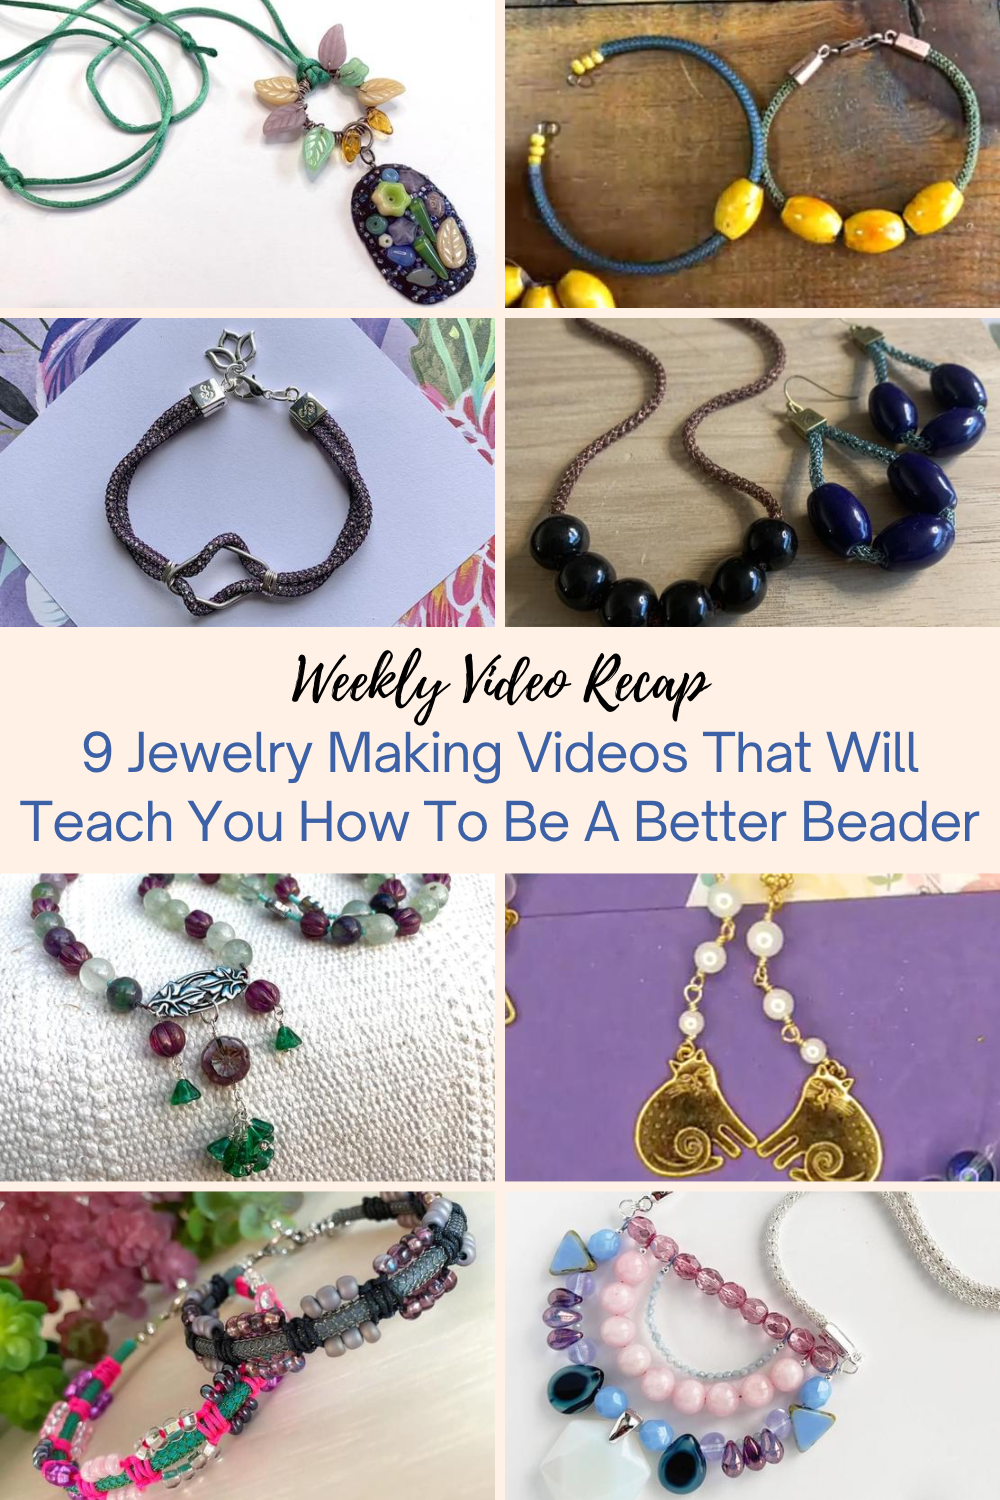 9 Jewelry Making Videos That Will Teach You How To Be A Better Beader Collage